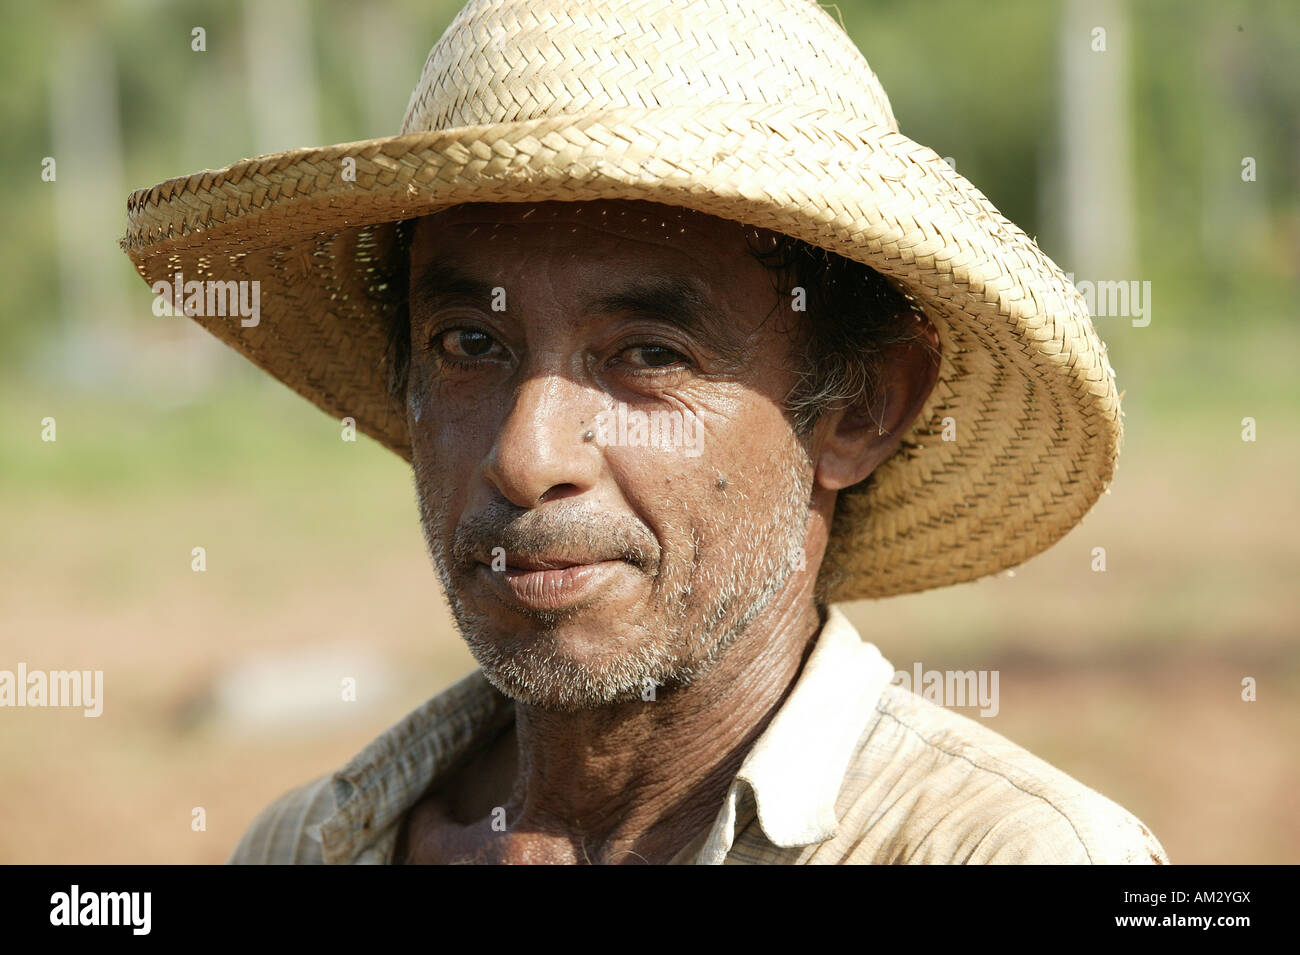 Field worker, portrait, Paraguay, South America Stock Photo